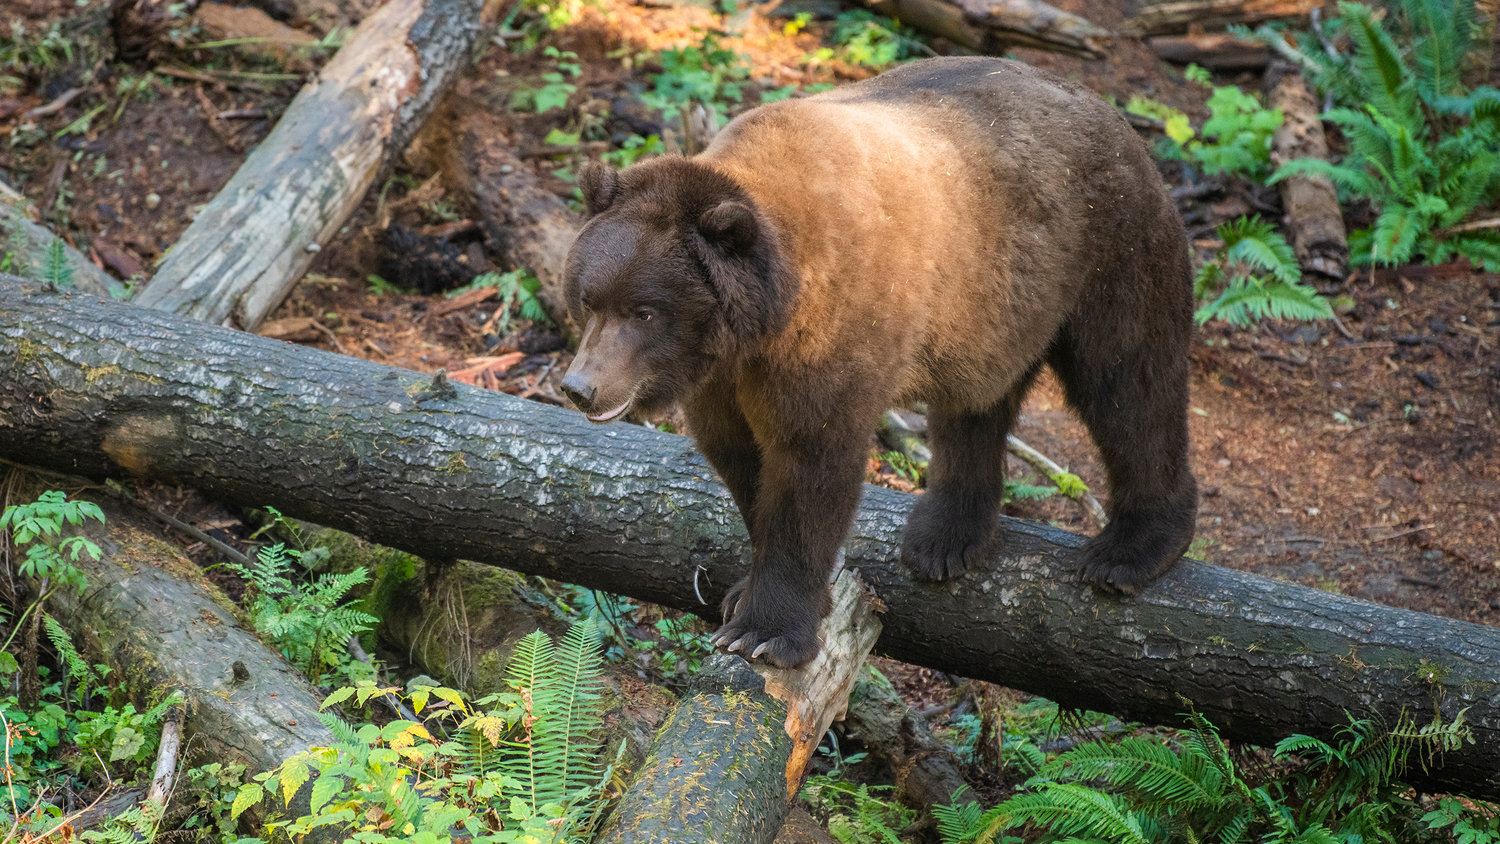 A grizzly bear walks on downed trees at Northwest Trek in October 2022.